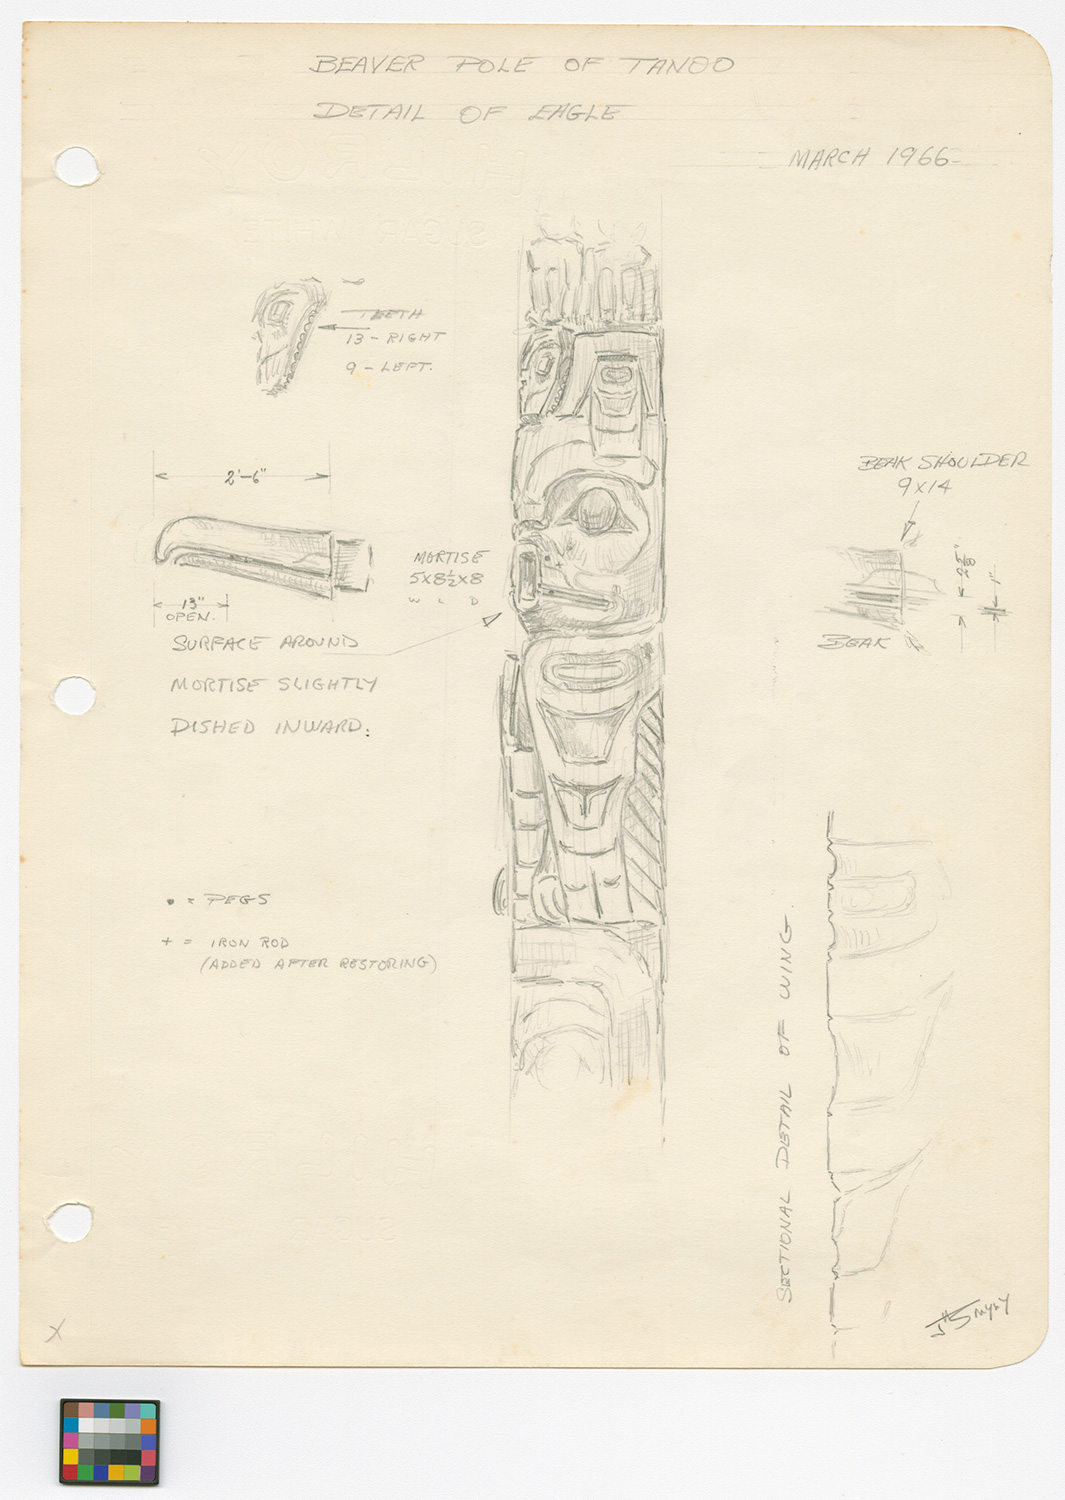 Pencil drawing and dimensions of the middle section of the house frontal pole showing the eagle by John Smyly.